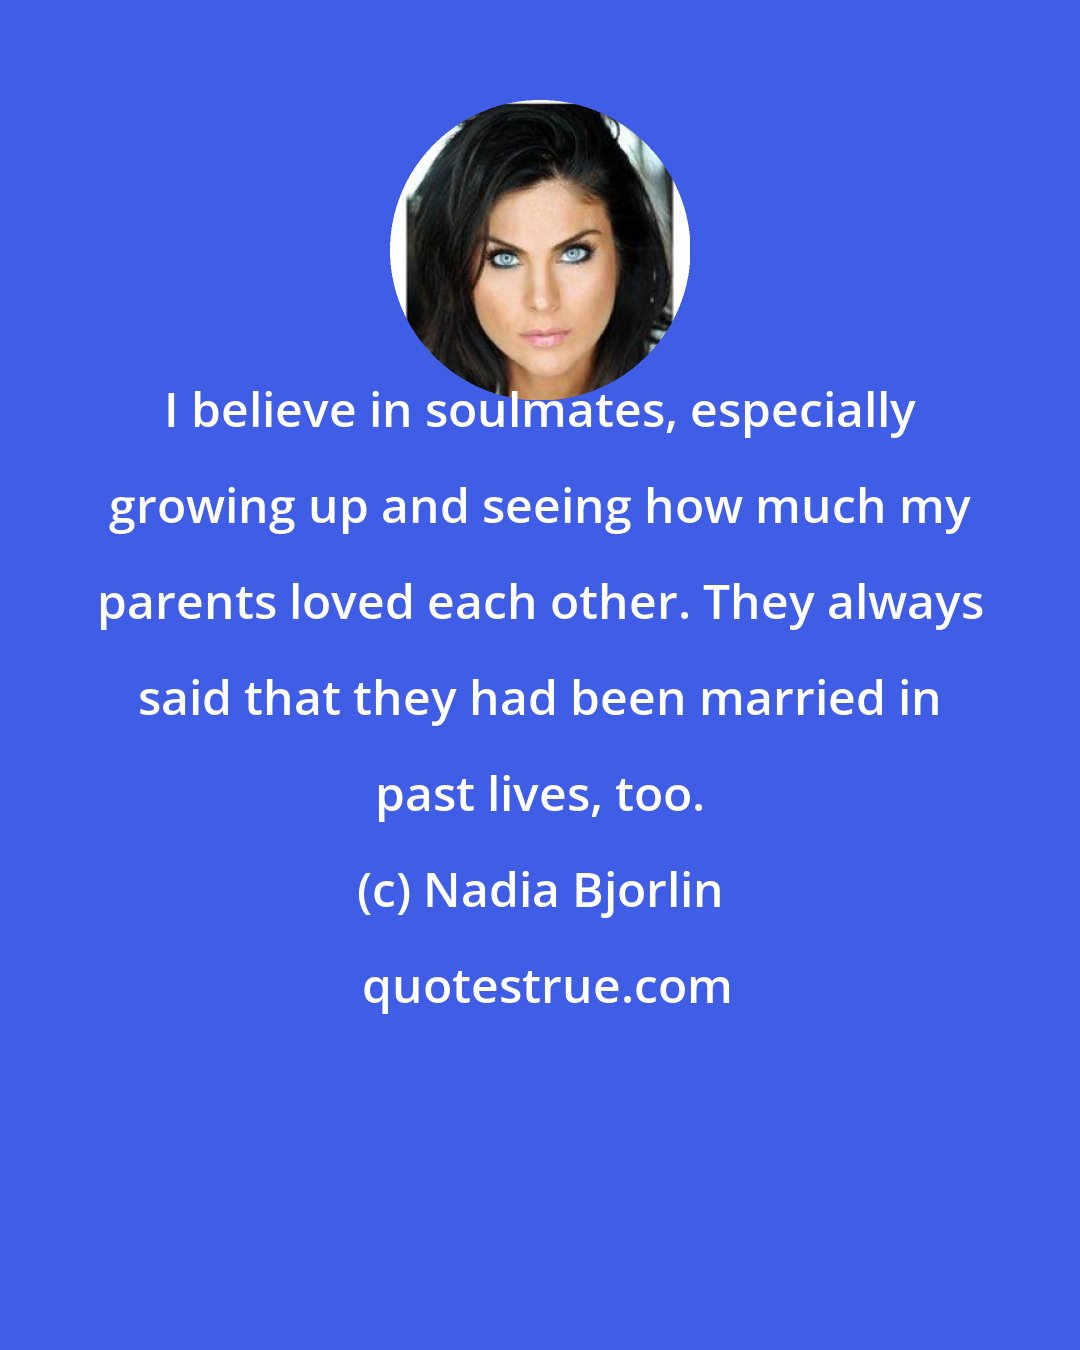 Nadia Bjorlin: I believe in soulmates, especially growing up and seeing how much my parents loved each other. They always said that they had been married in past lives, too.